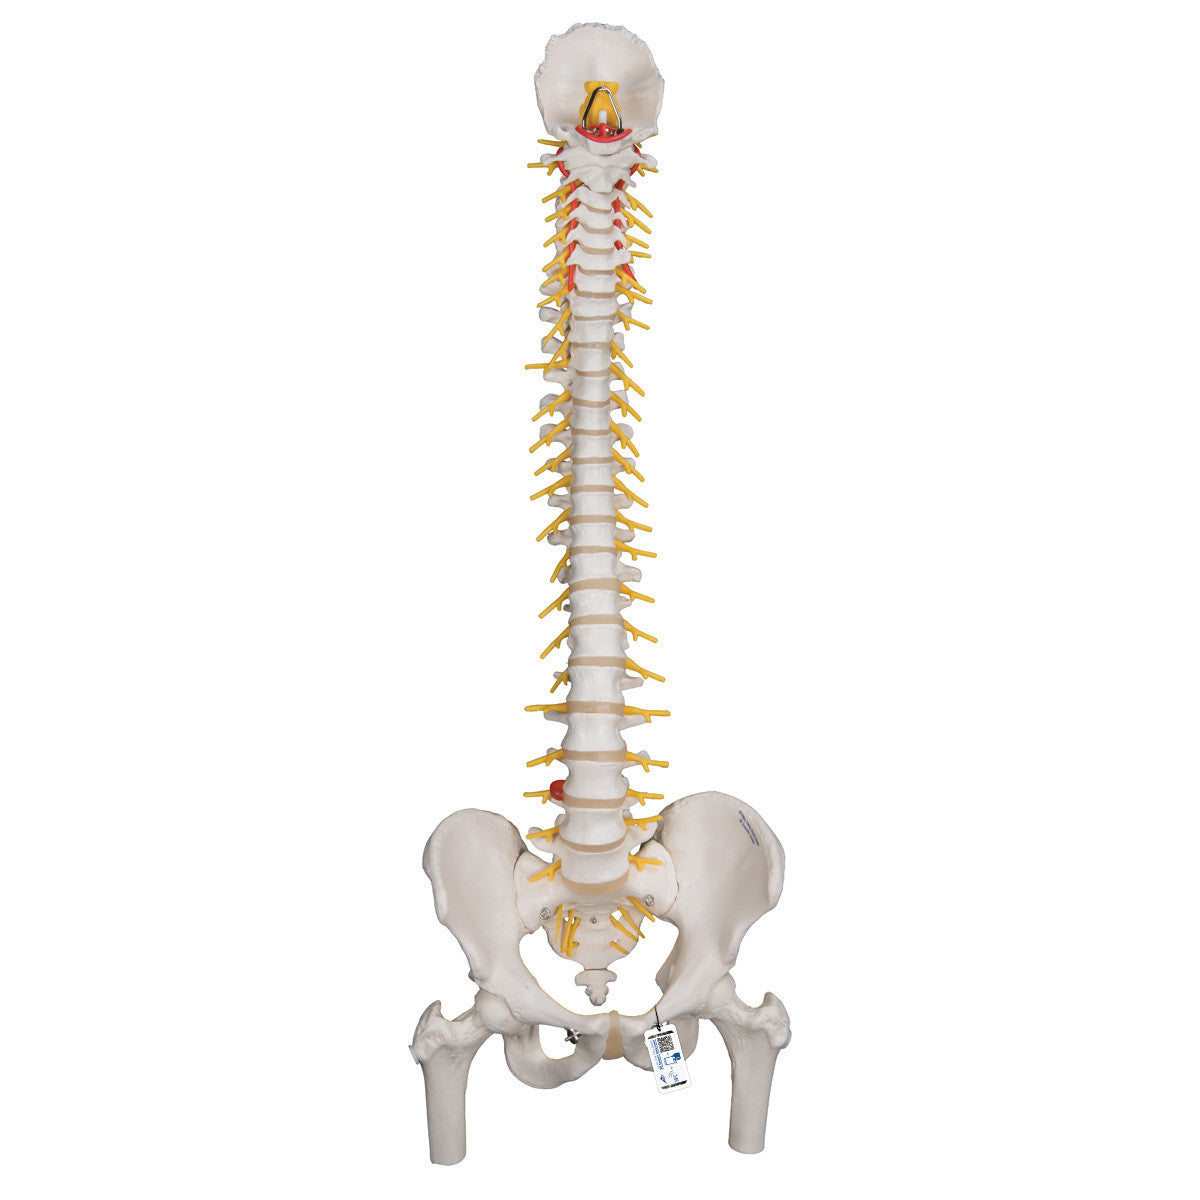 a58-6_01_1200_1200_deluxe-flexible-human-spine-model-with-femur-heads-sacral-opening-3b-smart-anatomy__82533.1589753152.1280.1280.jpg